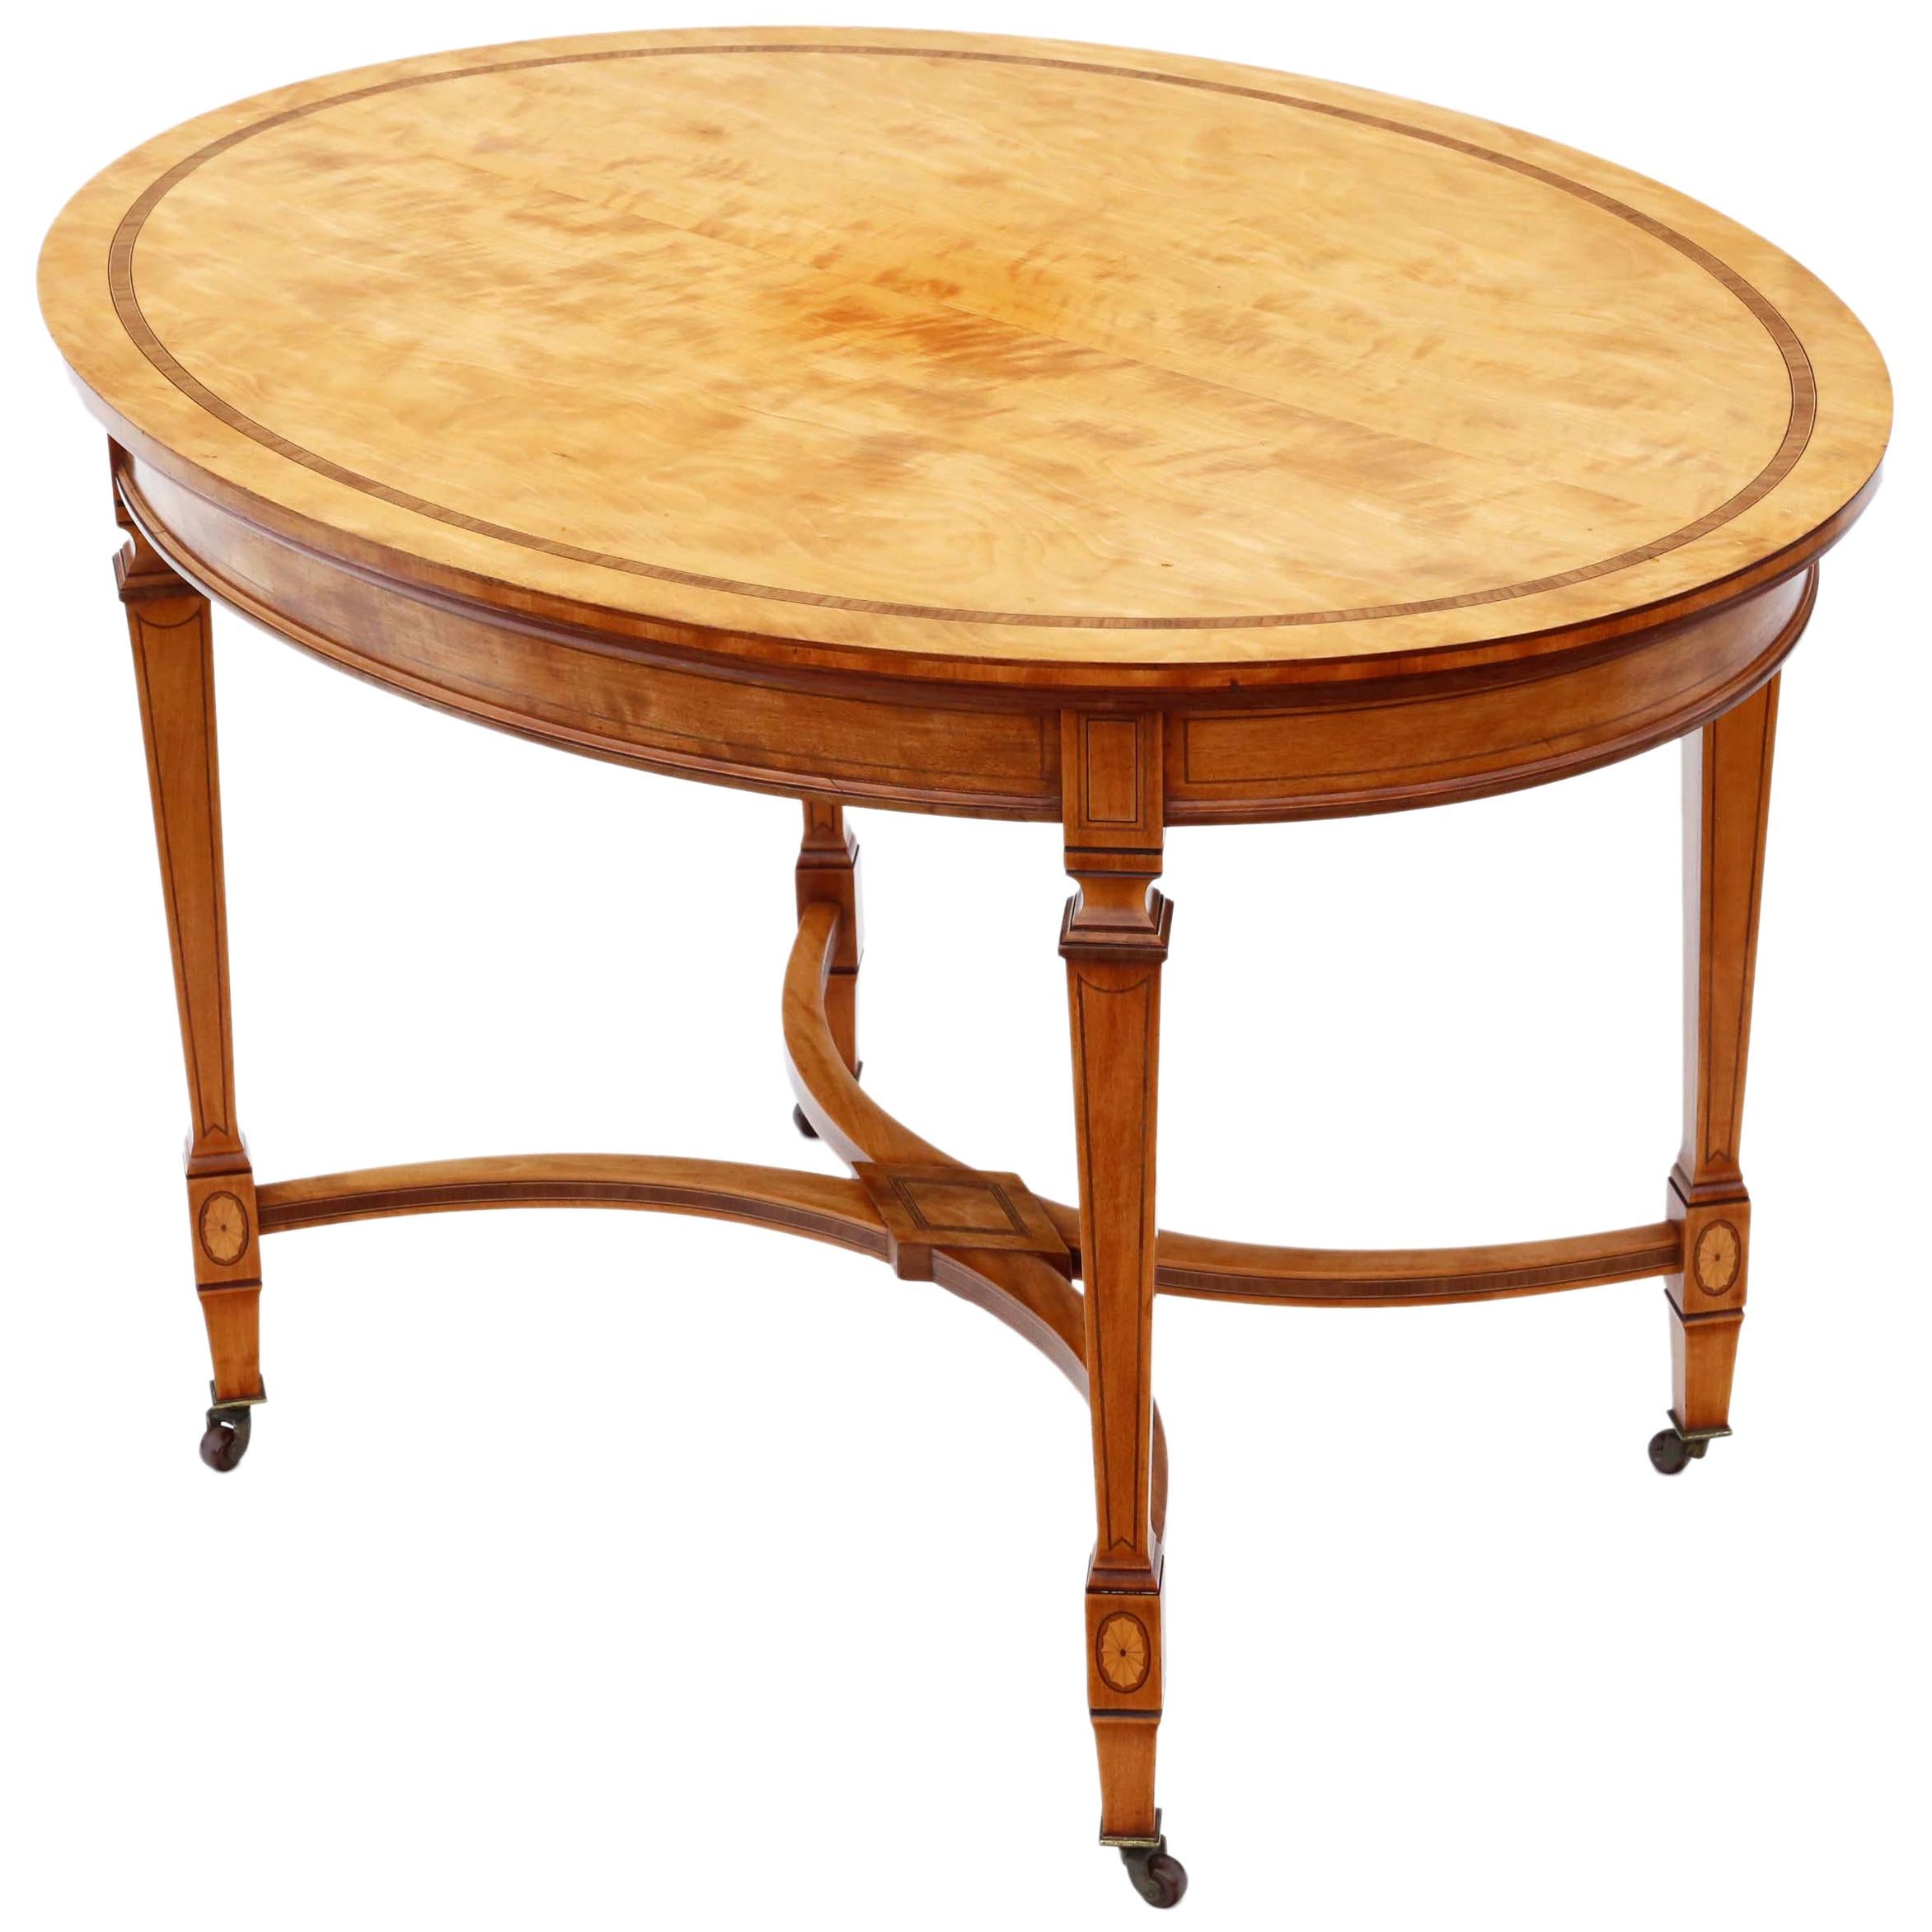 Victorian Inlaid Satinwood Centre Table